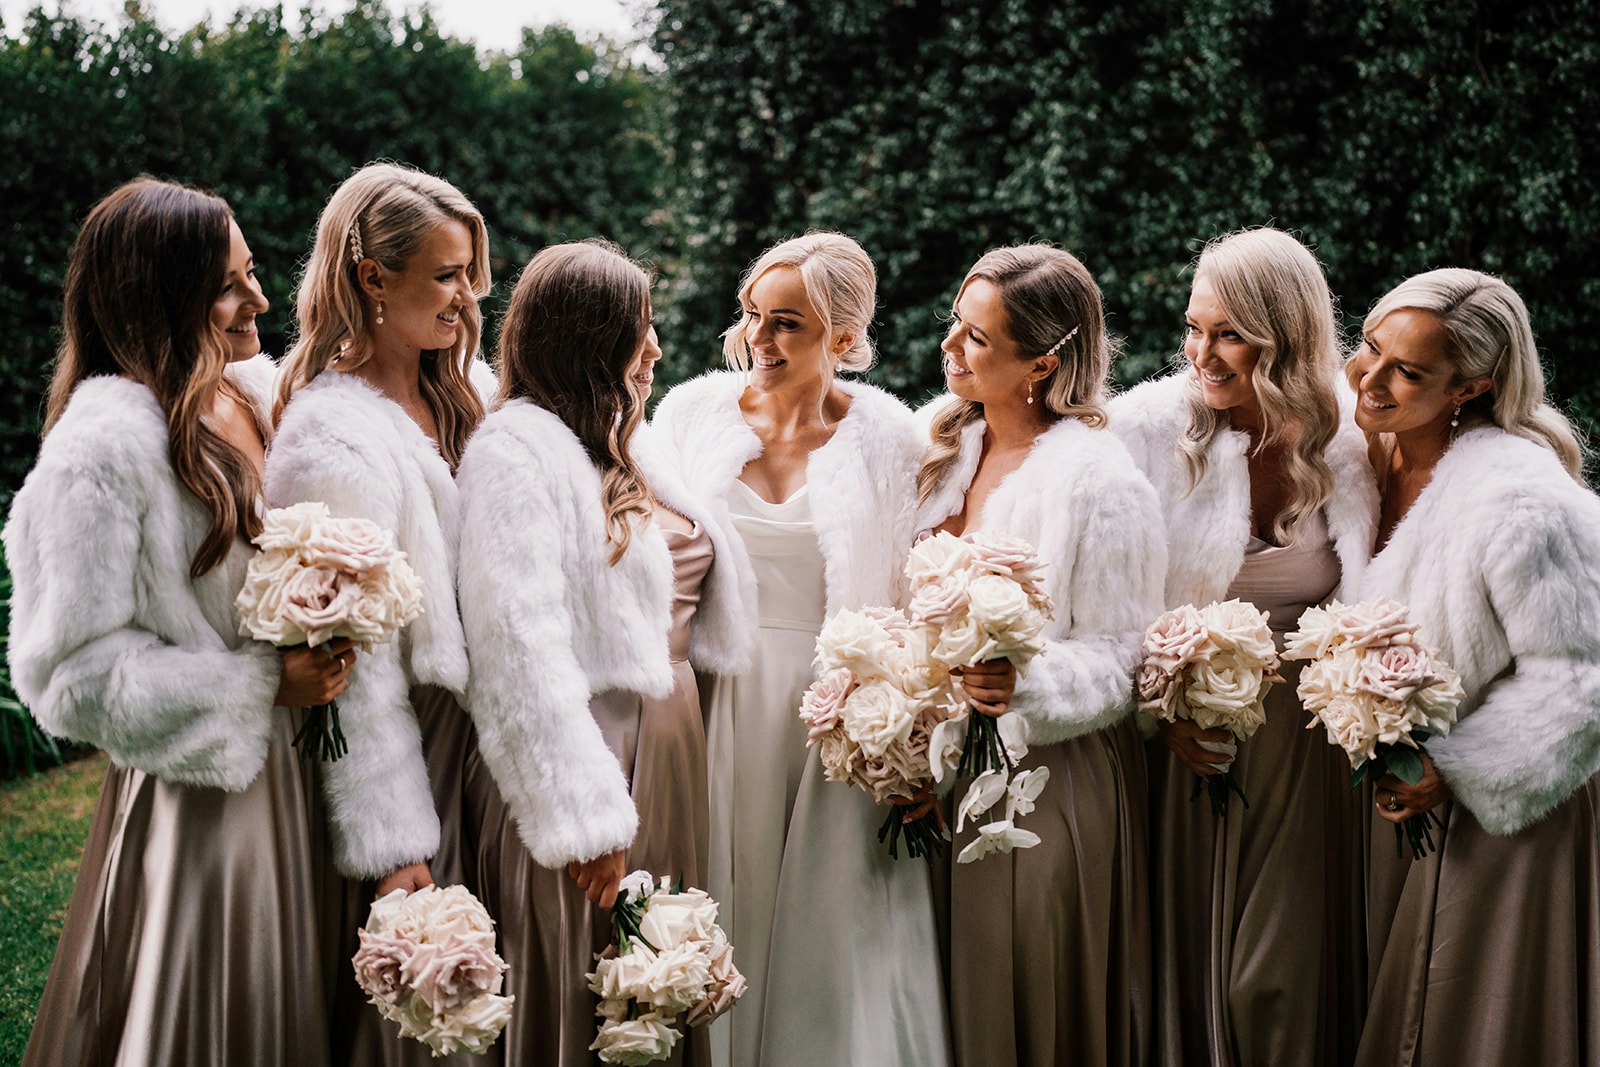 Bride and bridesmaids holding bouquet